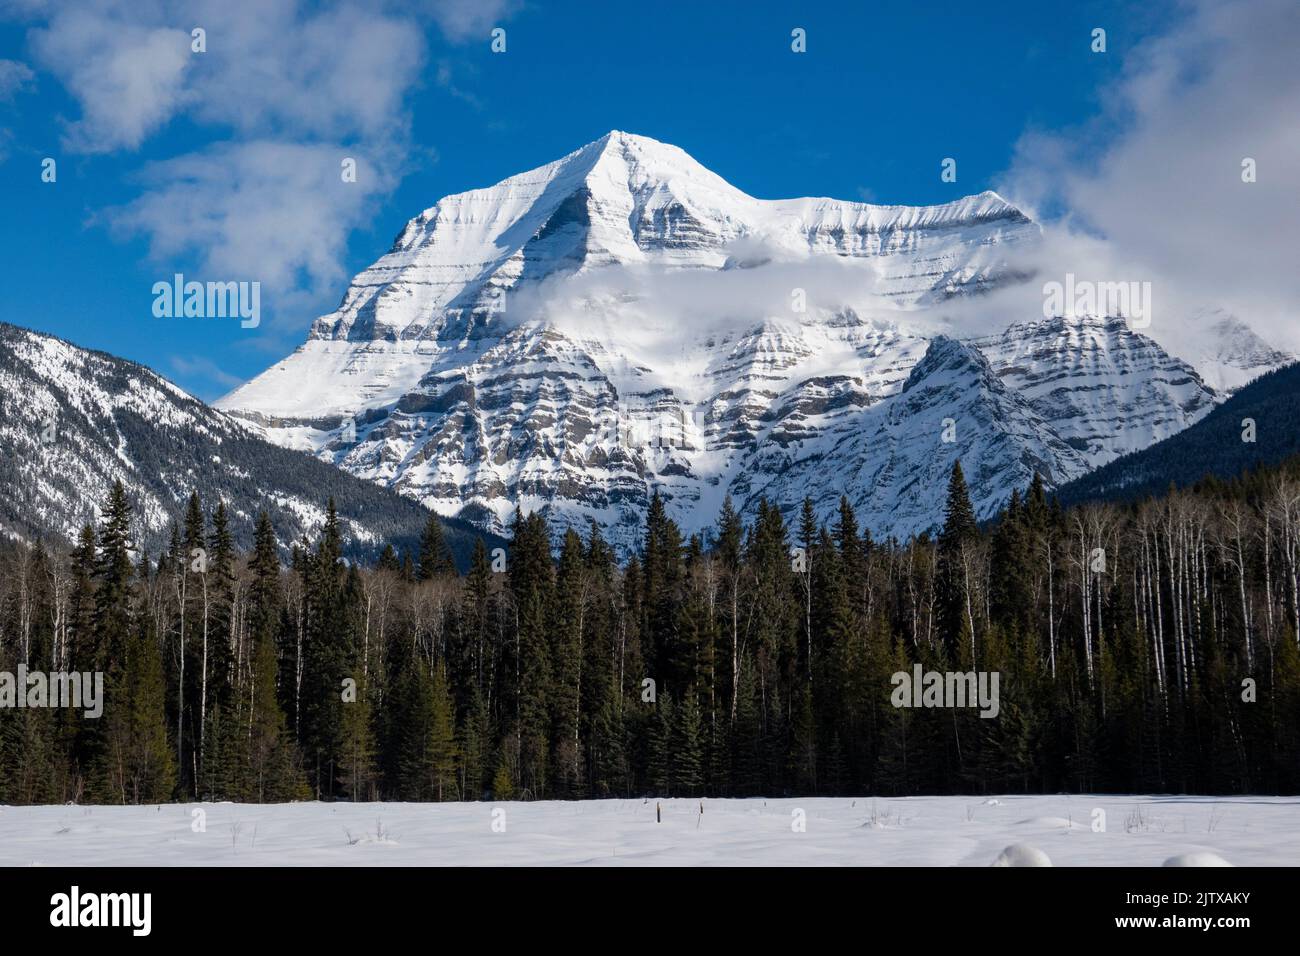 Mount Robson, British Columbia, Canada, the highest mountain in the Canadian Rocky Mountains. Stock Photo